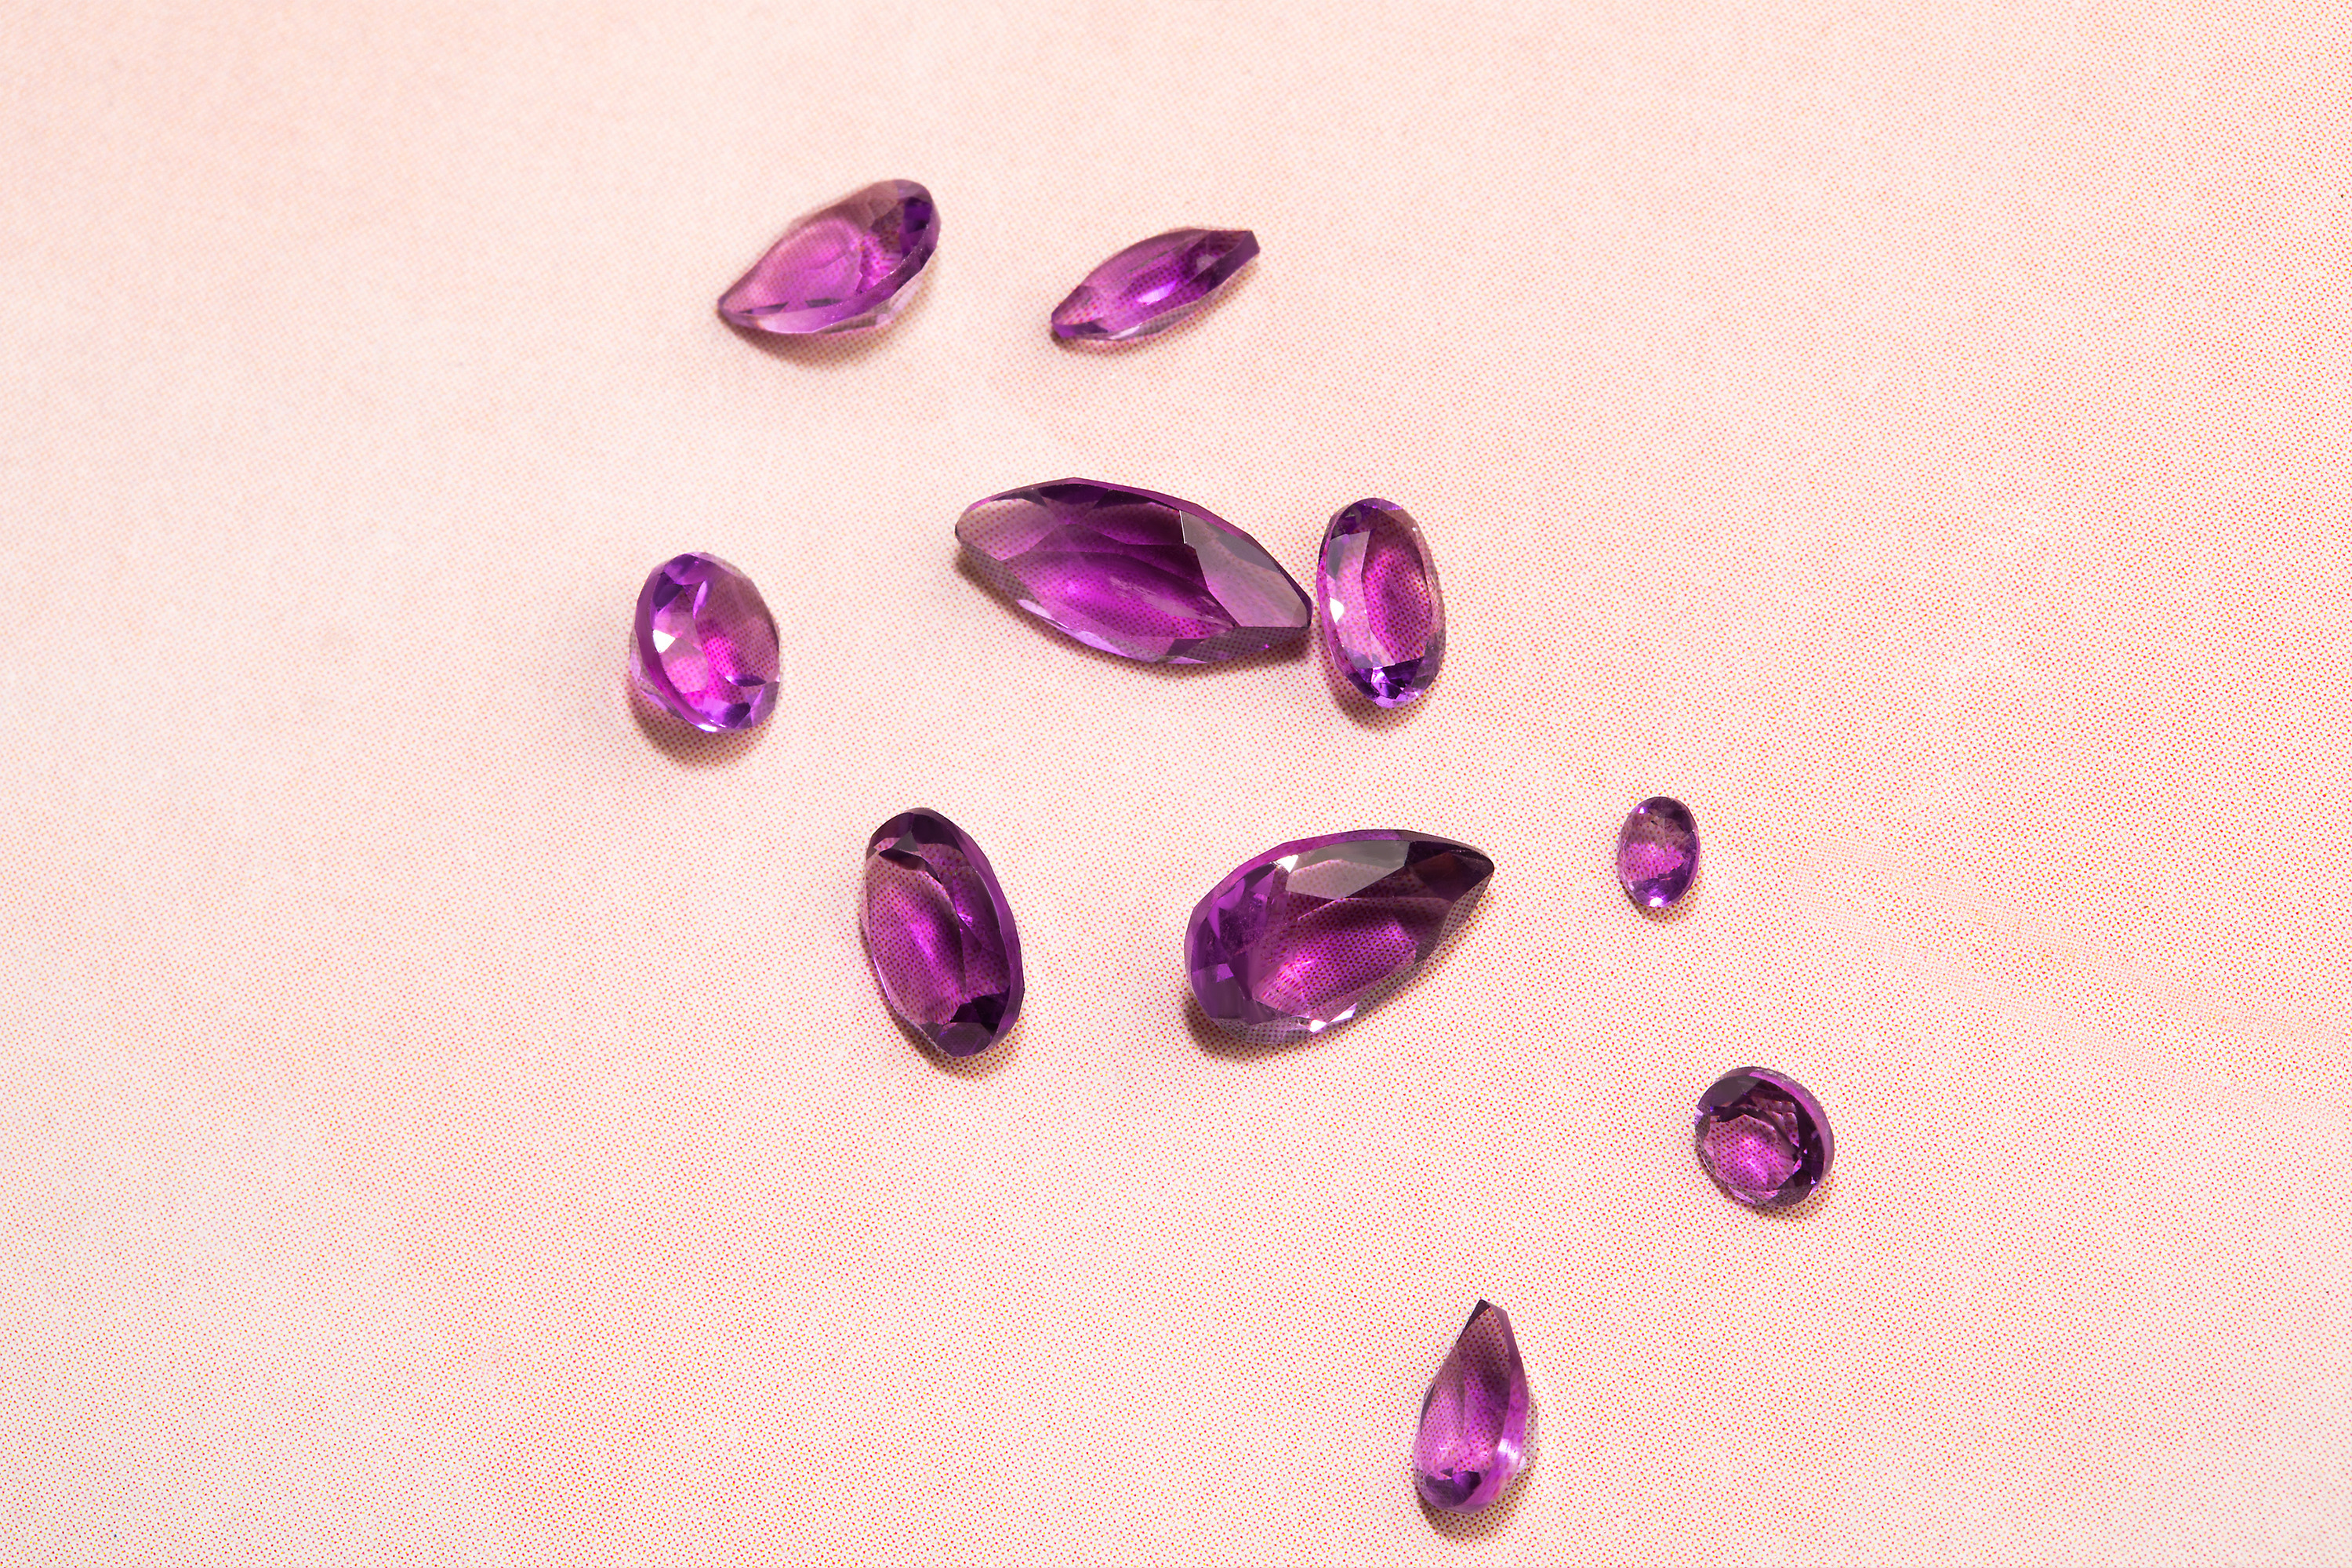 Authentic Amethyst gemstones are lying on a rose surface.